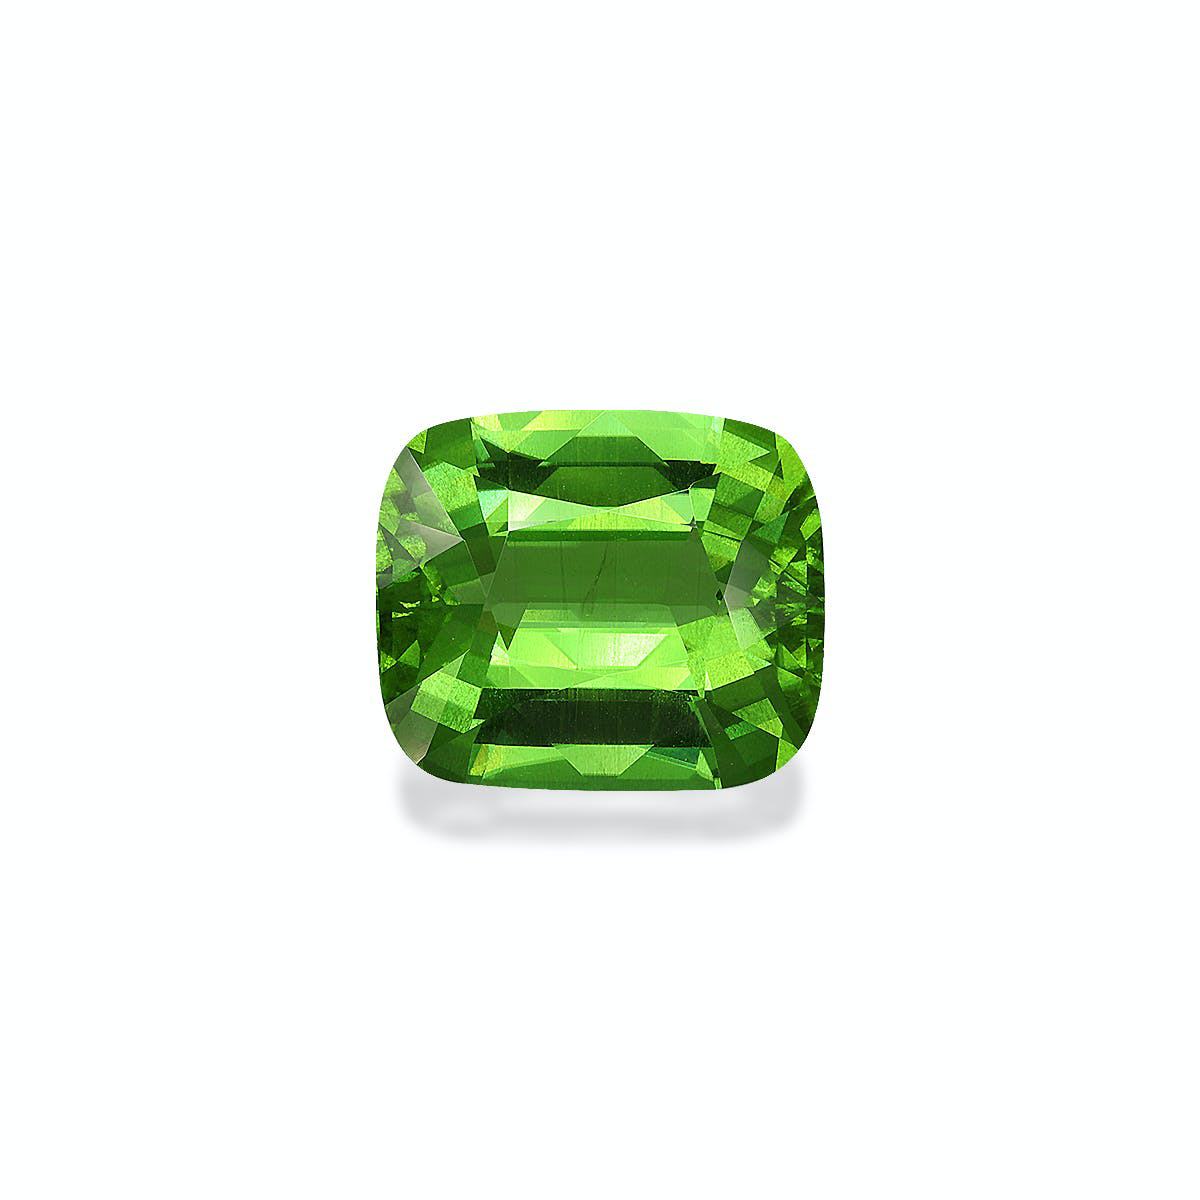 Picture of Vivid Green Peridot 11.55ct - 15x13mm (PD0286)